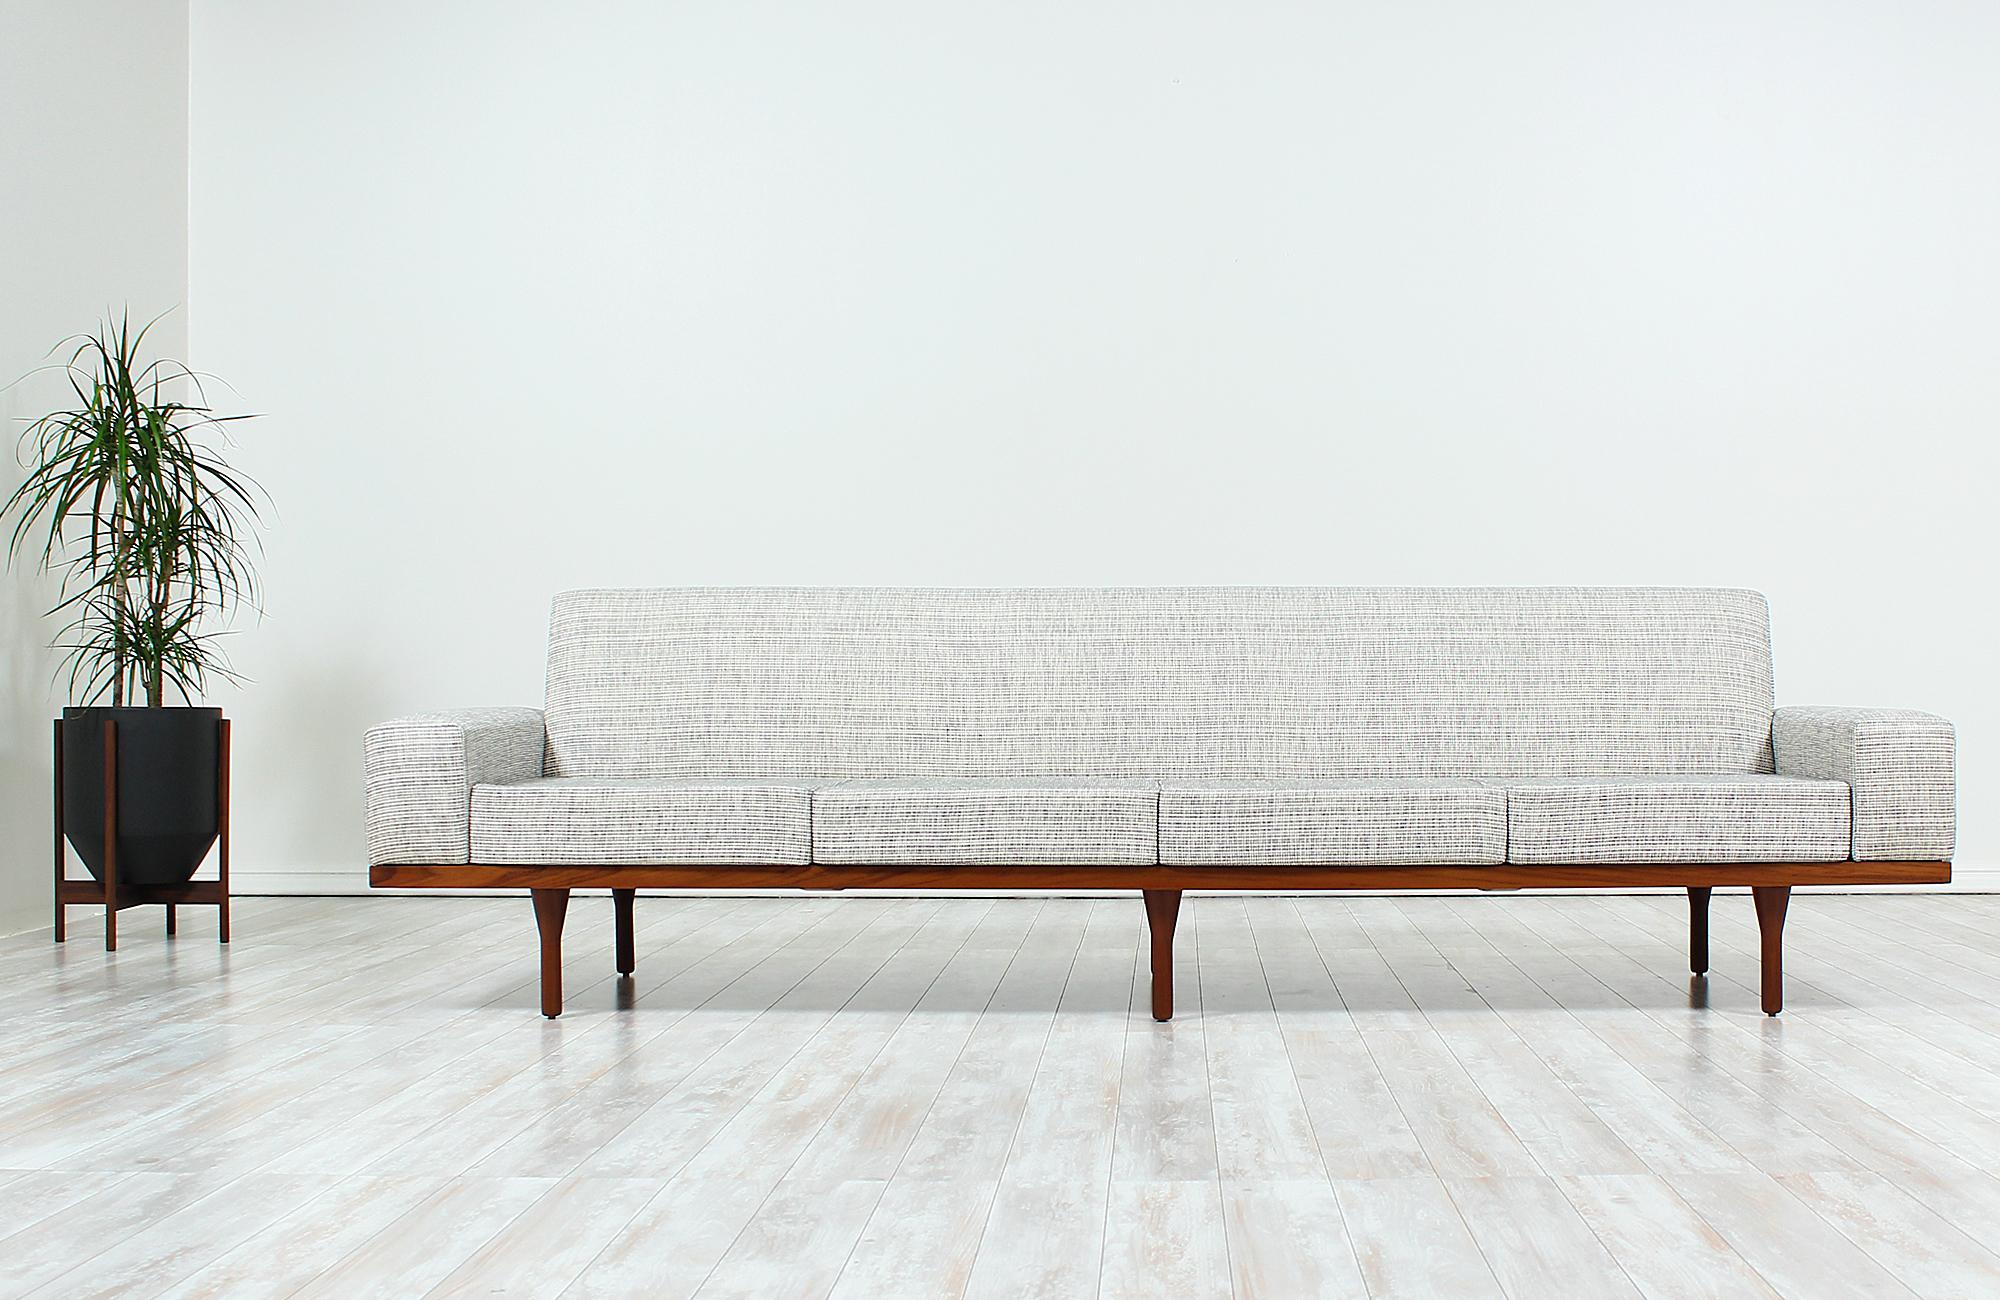 Exceptional Model 50-4 sofa designed by Illum Wikkelsø and manufactured in Denmark by Soren Willadsen, circa 1960s. This large Danish modern design features a solid teak frame exposing warm, grainy details that contrast beautifully with the new